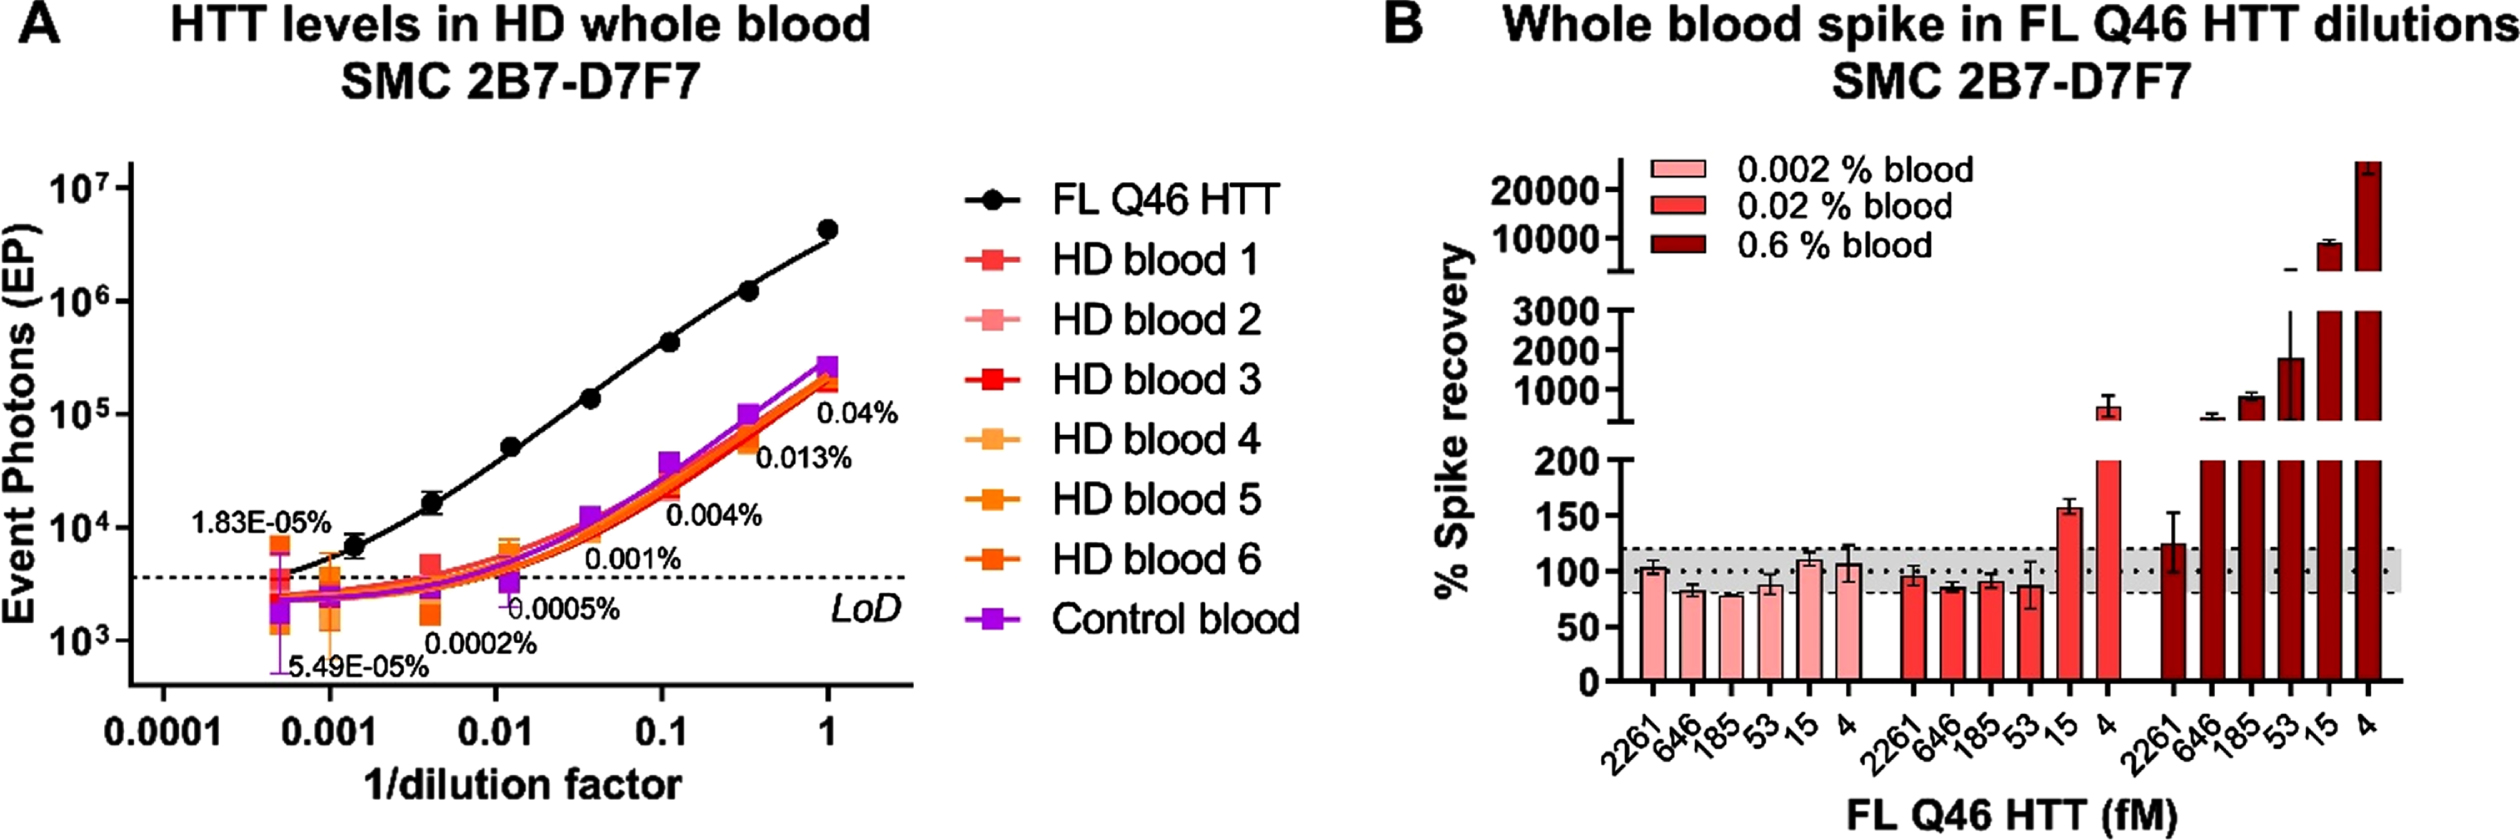 A) CHDI_HTT_143 (2B7-D7F7) SMC assay HTT levels in HD and control participant whole blood. On the x-axis the inverse of dilution factor, with respect to the highest dilution used, is reported. For the FL Q46 HTT calibrator, the inverse of the dilution factor is calculated with respect to the highest concentration tested. The number reported close to each blood dilution is the final percentage of blood diluted in aCSF. All samples are reported as the average and standard deviation of three technical replicates. B) aCSF FL Q46 HTT recovery after spiking three dilutions of human healthy whole blood as detected via the CHDI_HTT_143 (2B7-D7F7) SMC assay. The recovery percentage is the ratio between the back-calculated concentration minus the nominal concentration and the nominal concentration (x100). All samples are reported as the average and standard deviation of three technical replicates.